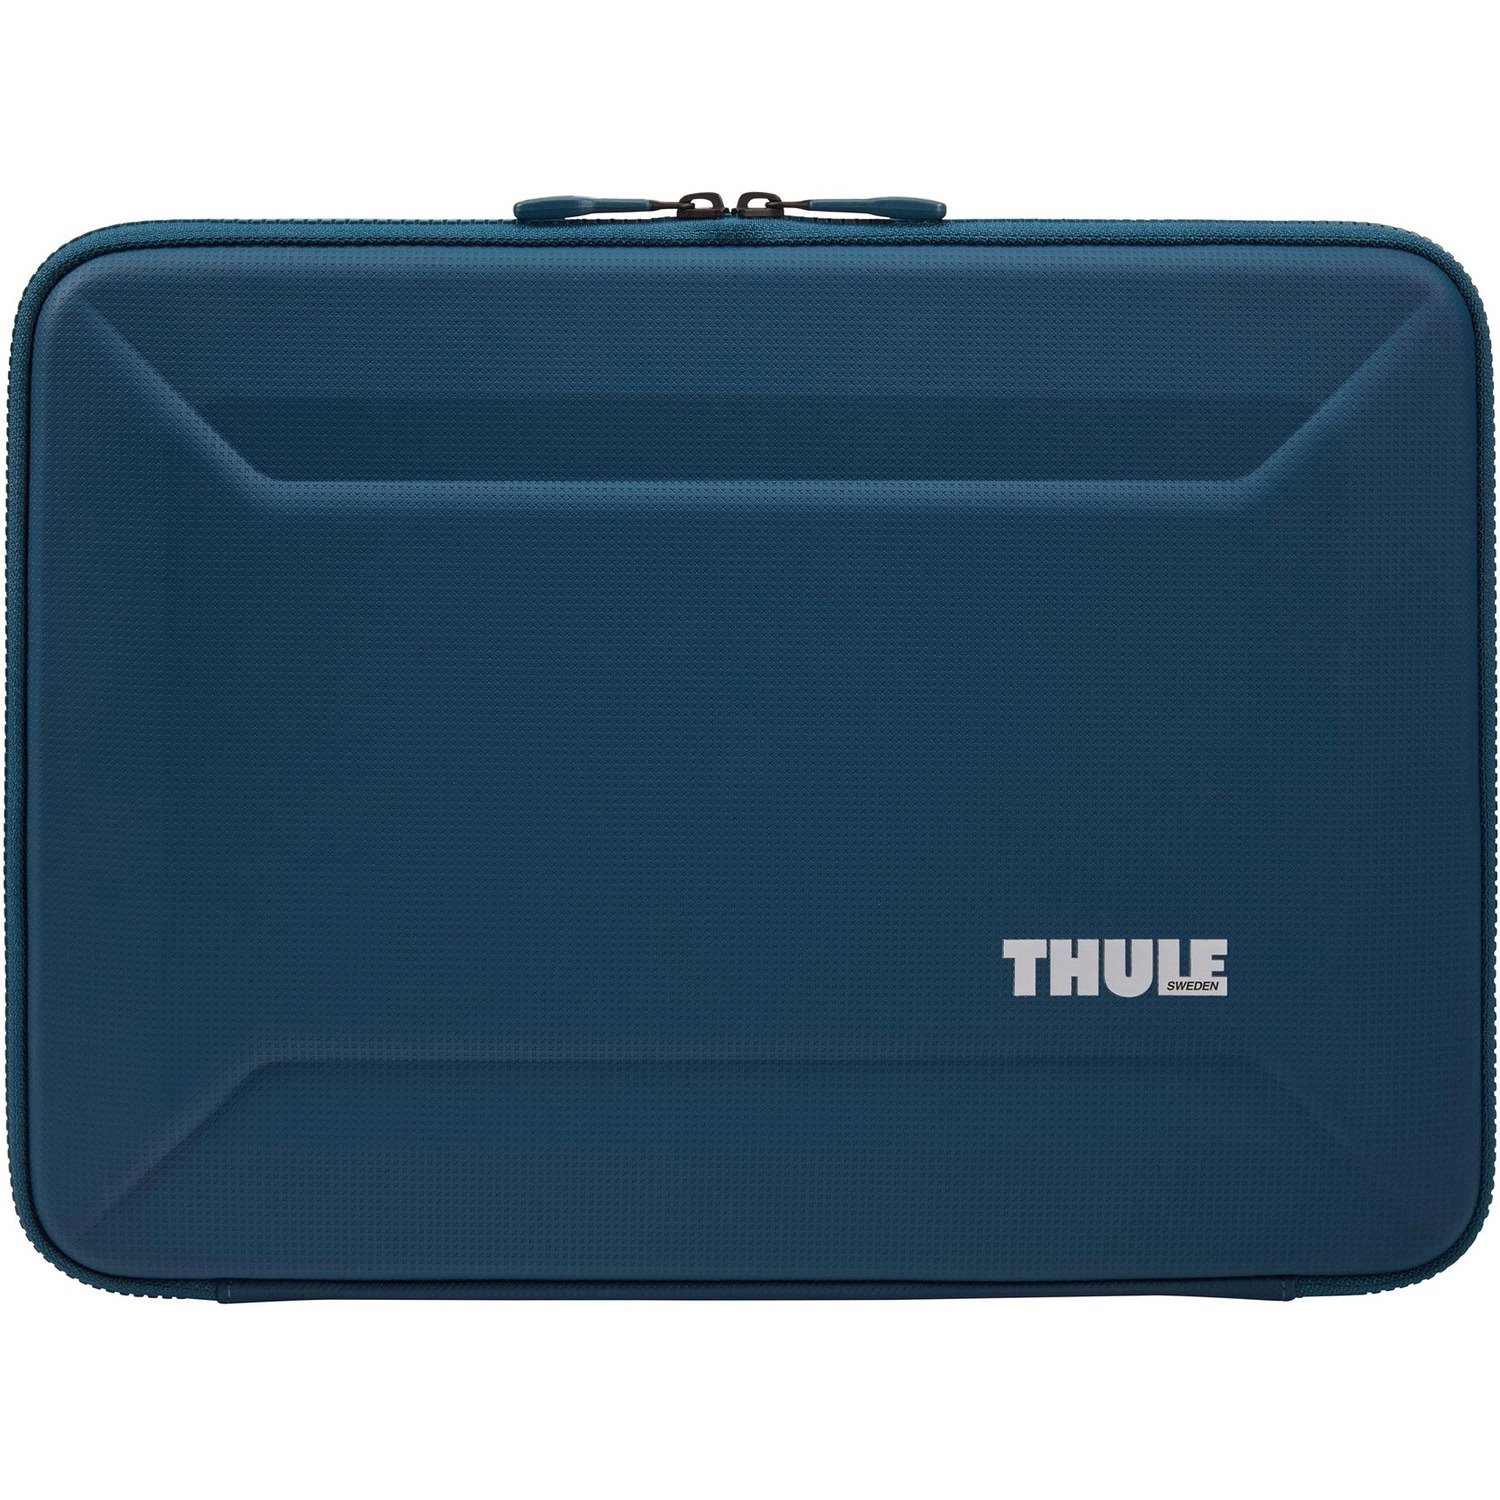 Thule Gauntlet Carrying Case (Sleeve) for 35.6 cm (14") to 40.6 cm (16") Apple MacBook Pro